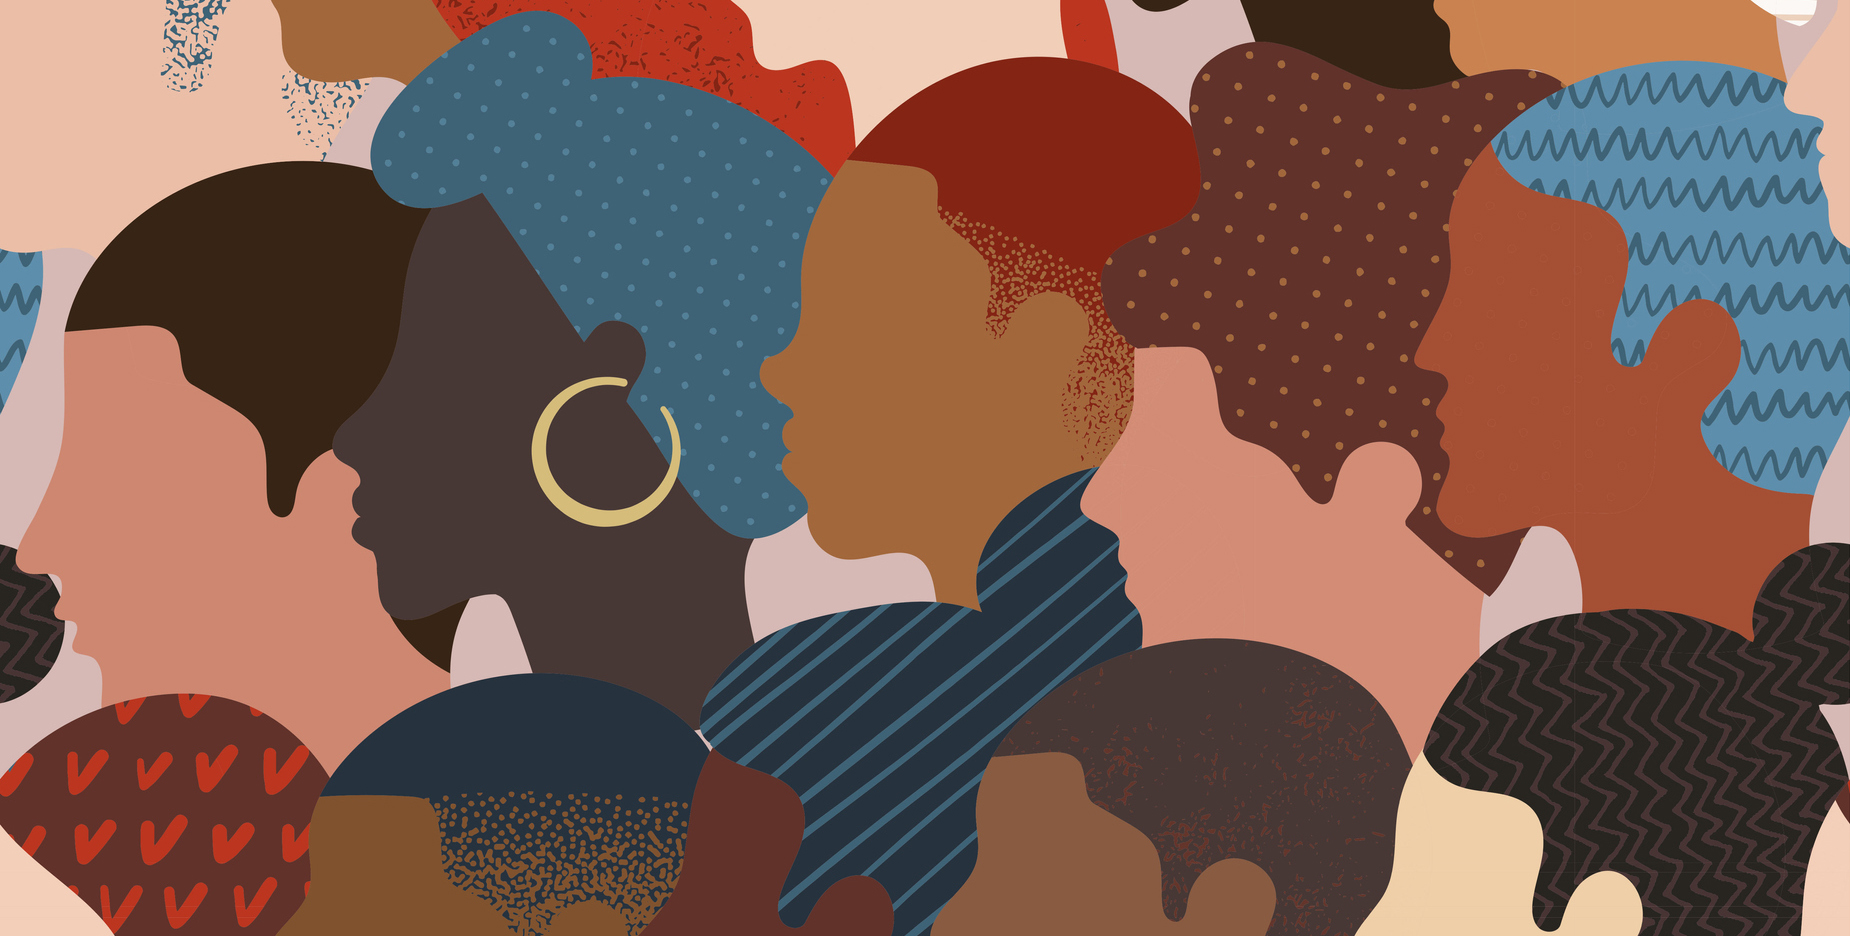 illustration of heads of a diverse group of people